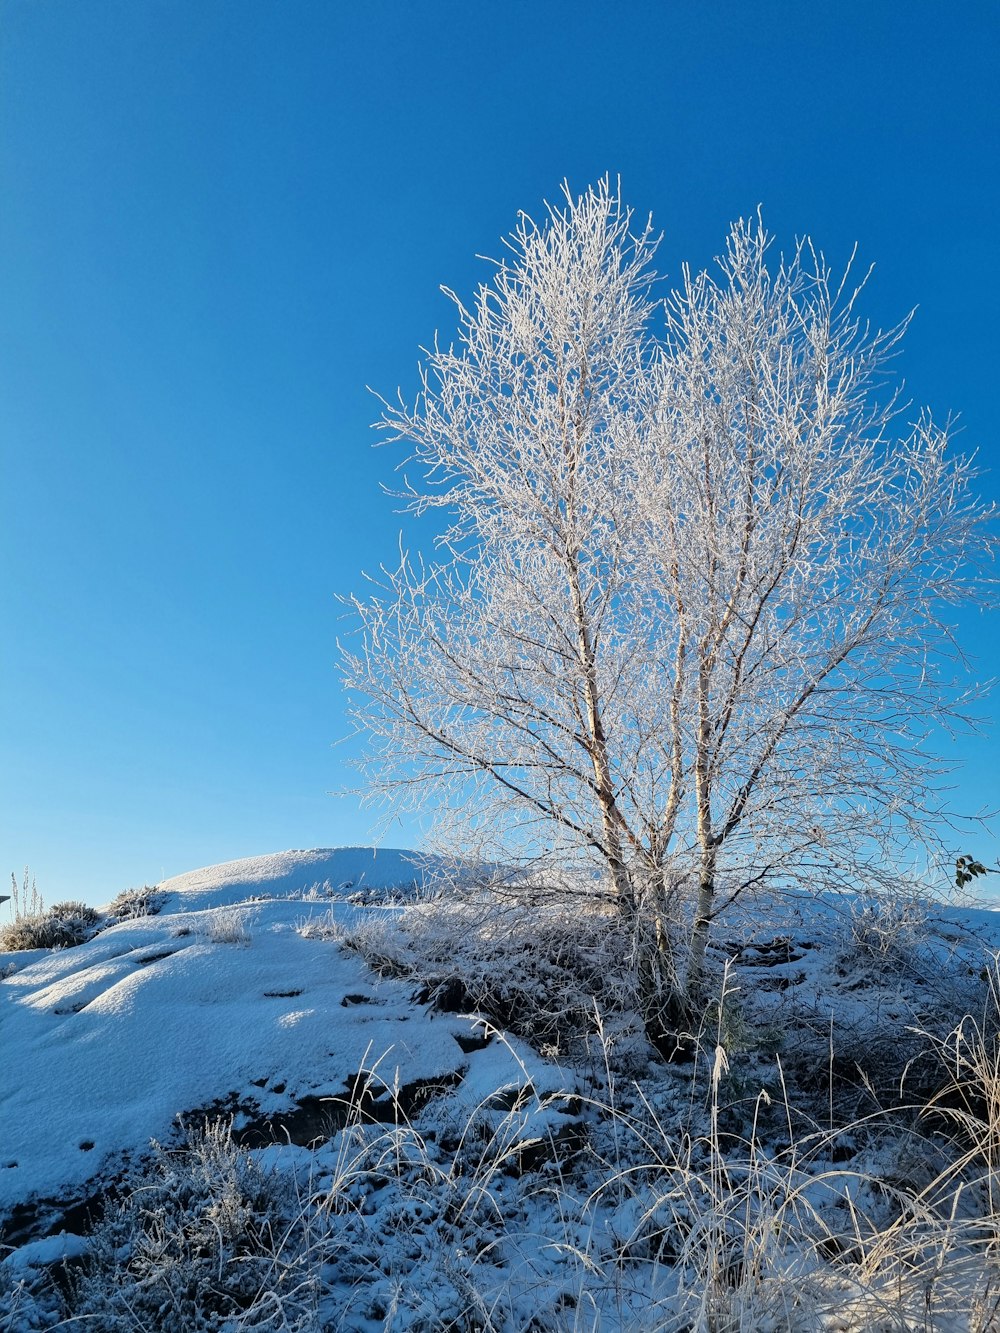 a lone tree on a snowy hill with a blue sky in the background